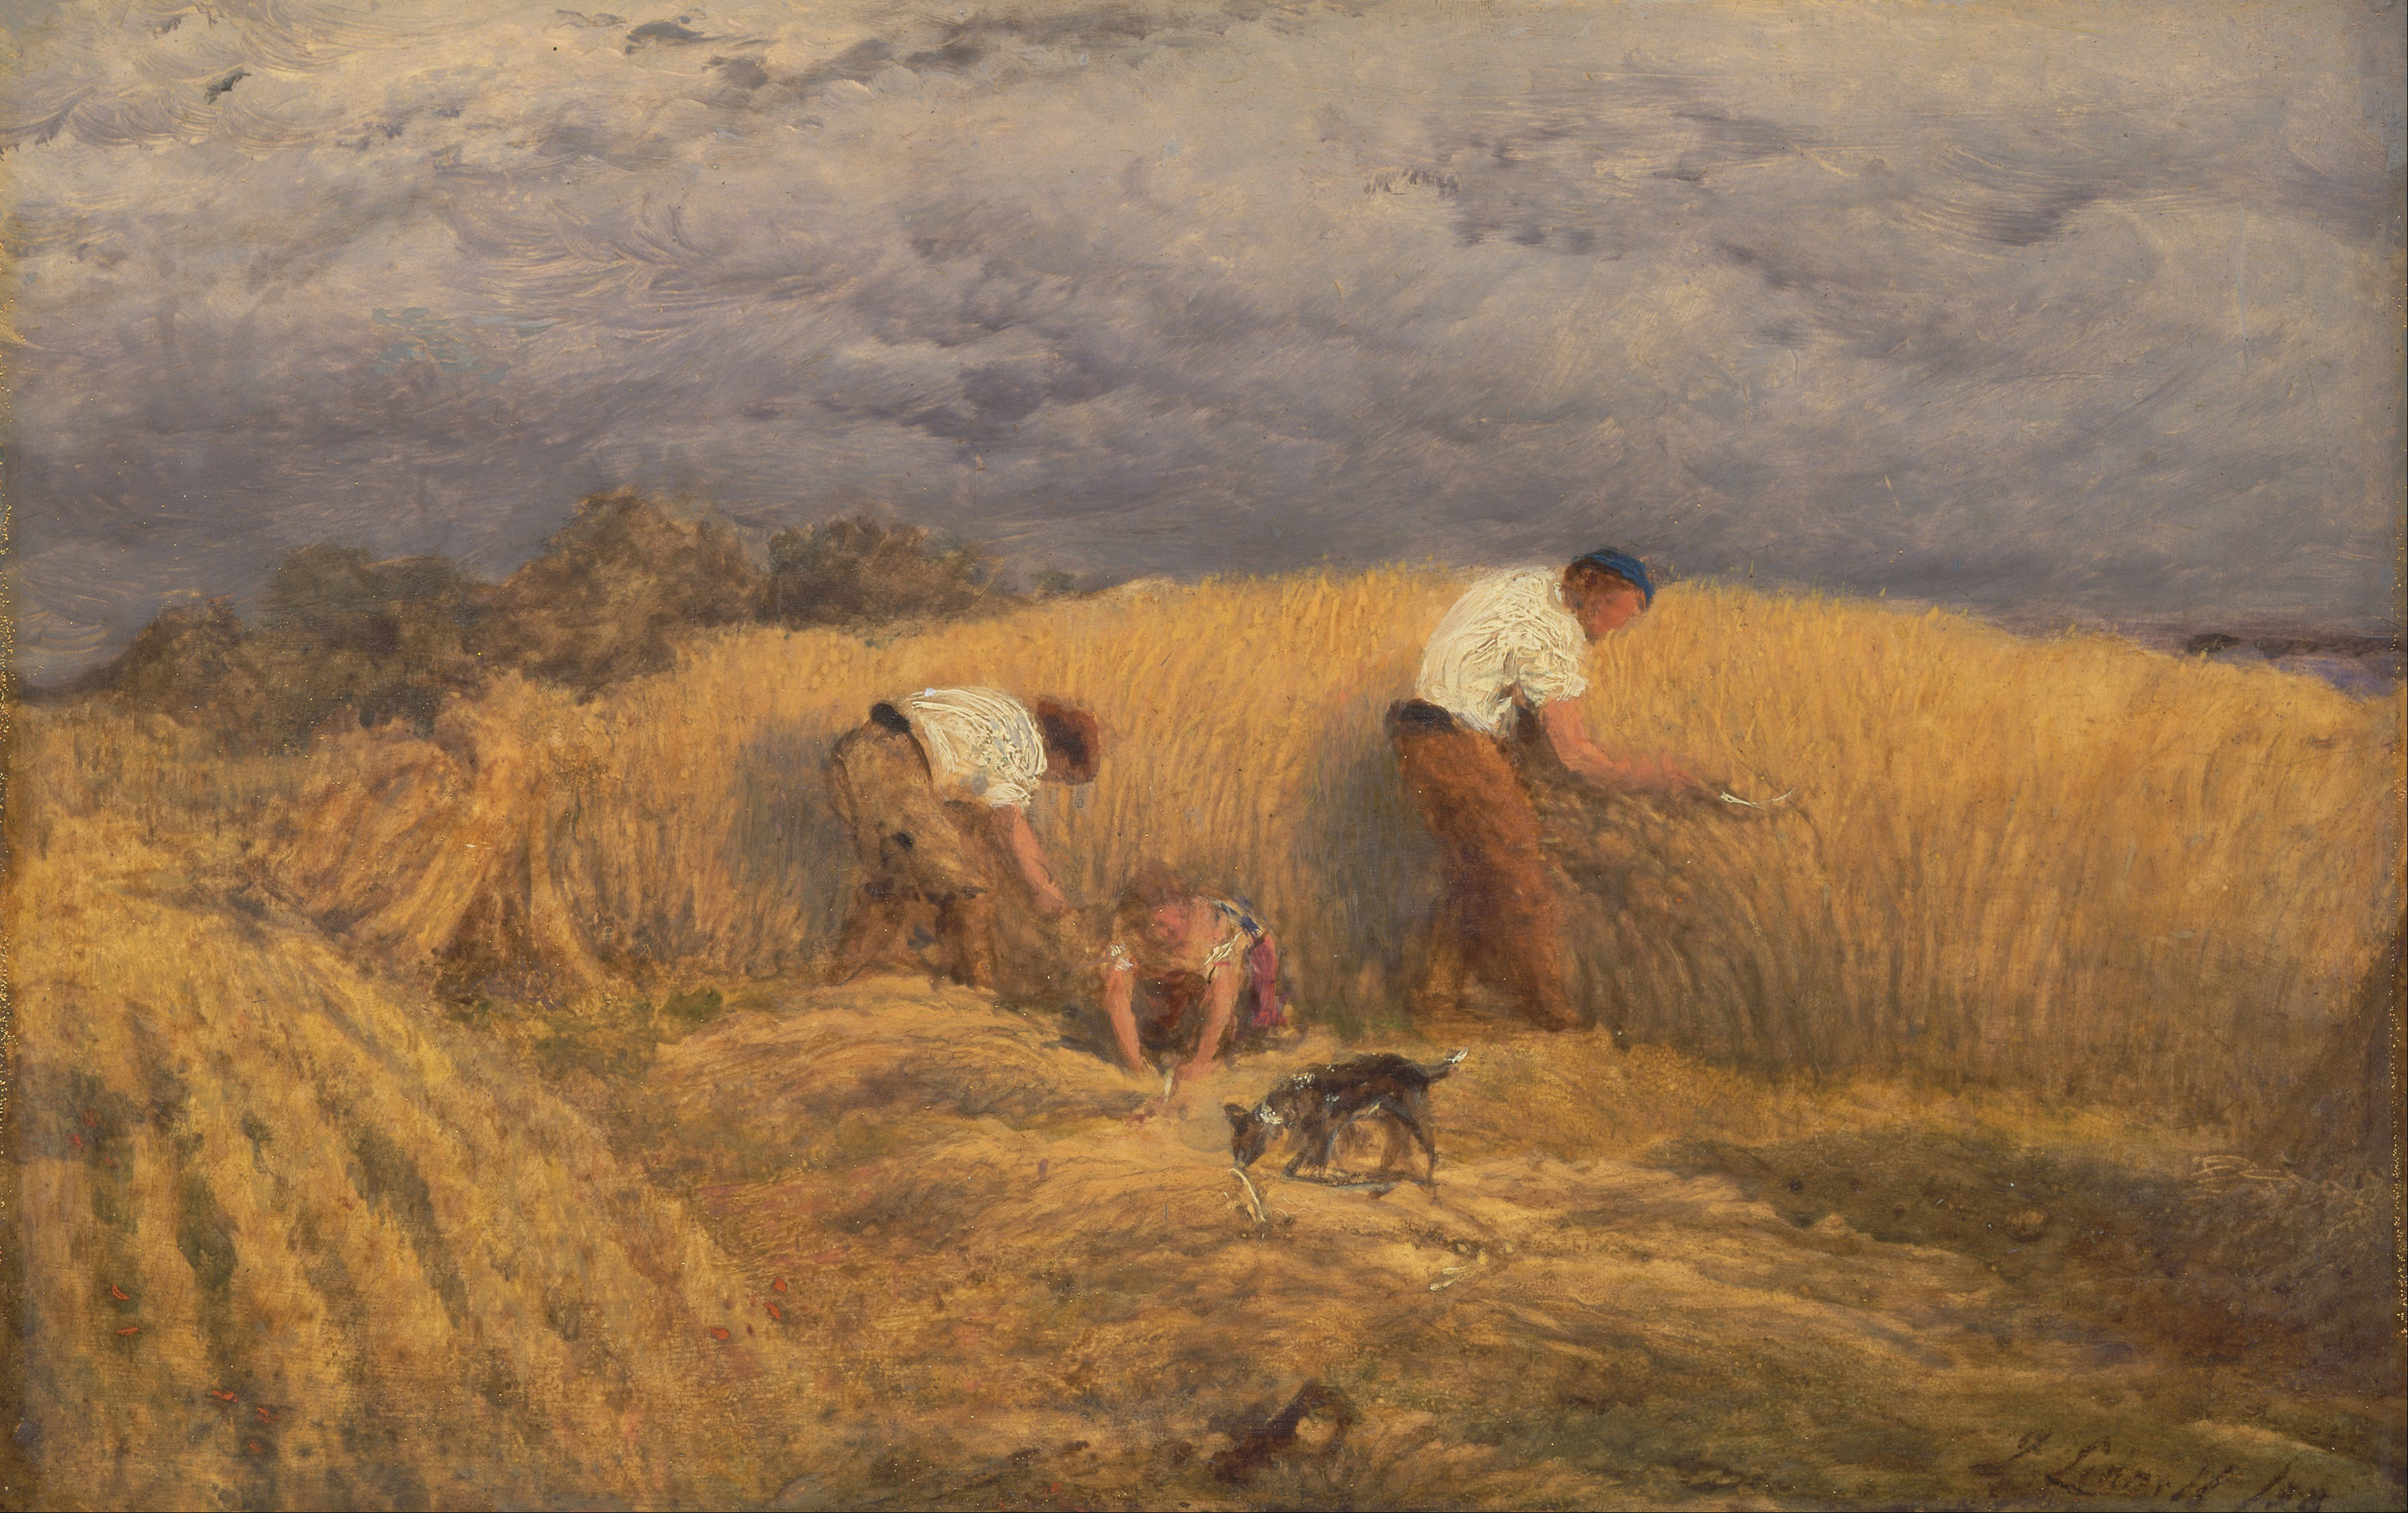 John Linnell - A Finished Study for 'Reaping' - Google Art Project